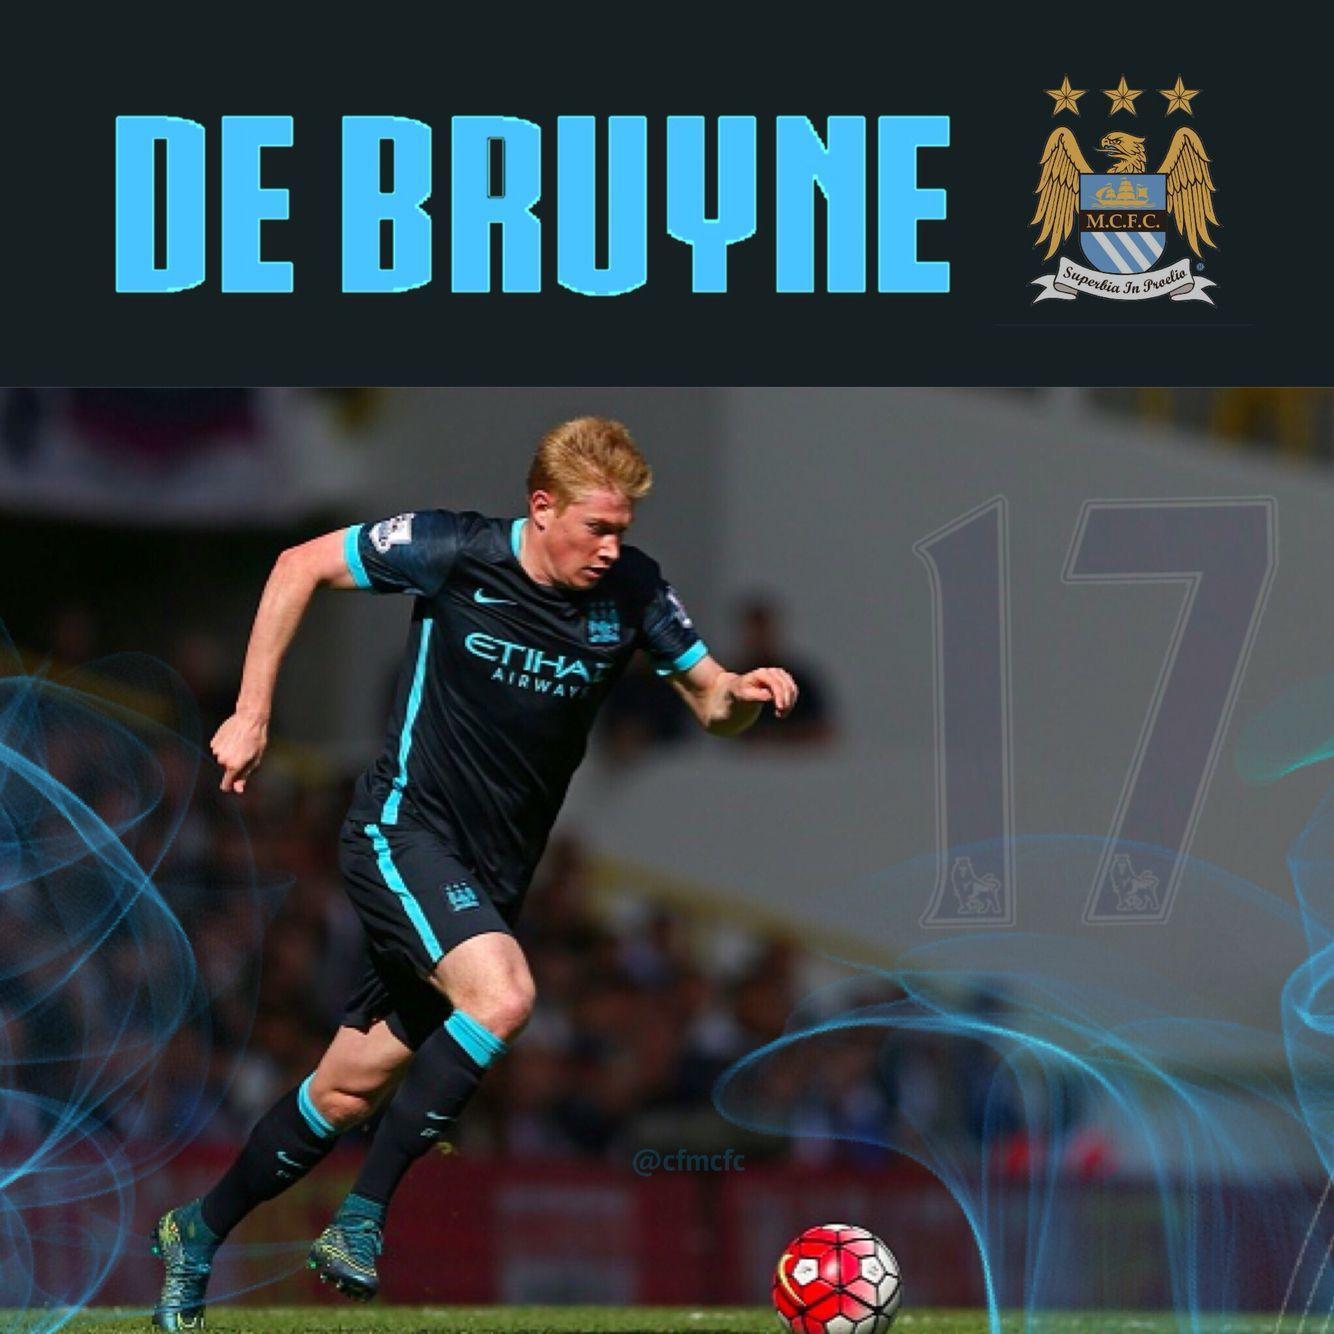 Kevin de Bruyne says I don't want to be the Manchester City star